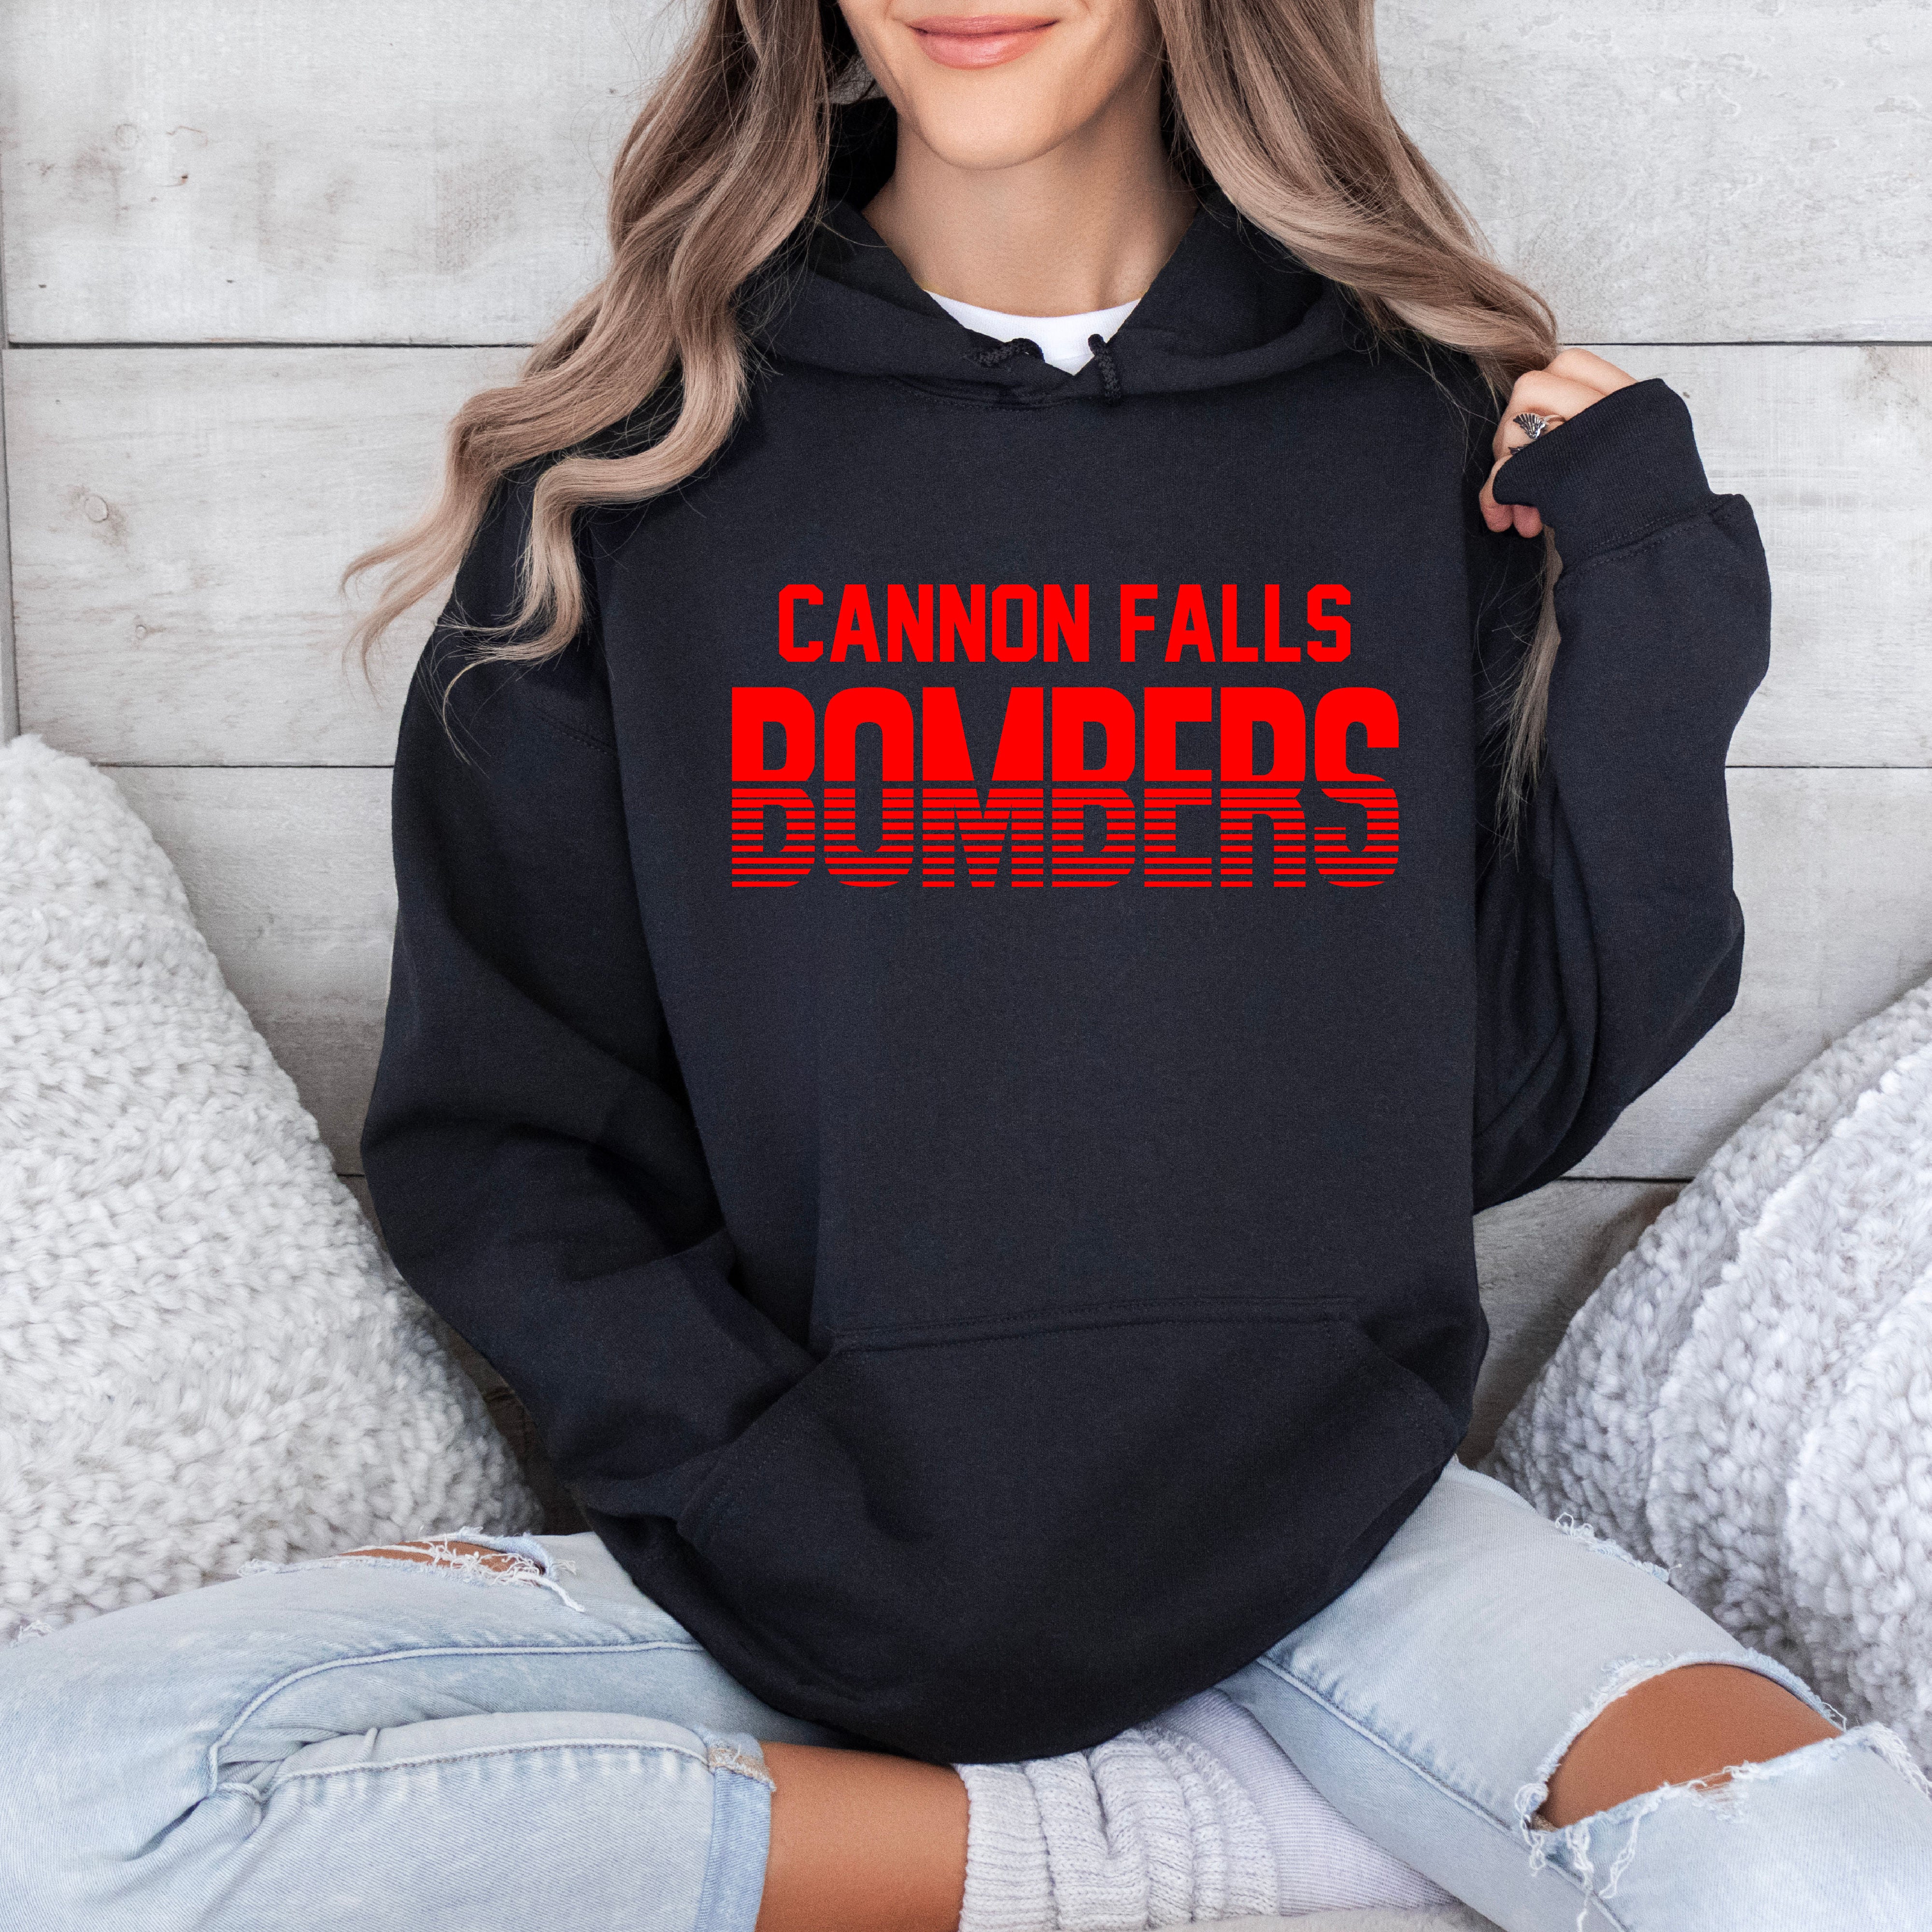 Cannon Falls Bombers Slice Hoodie, Pullover, or Tee